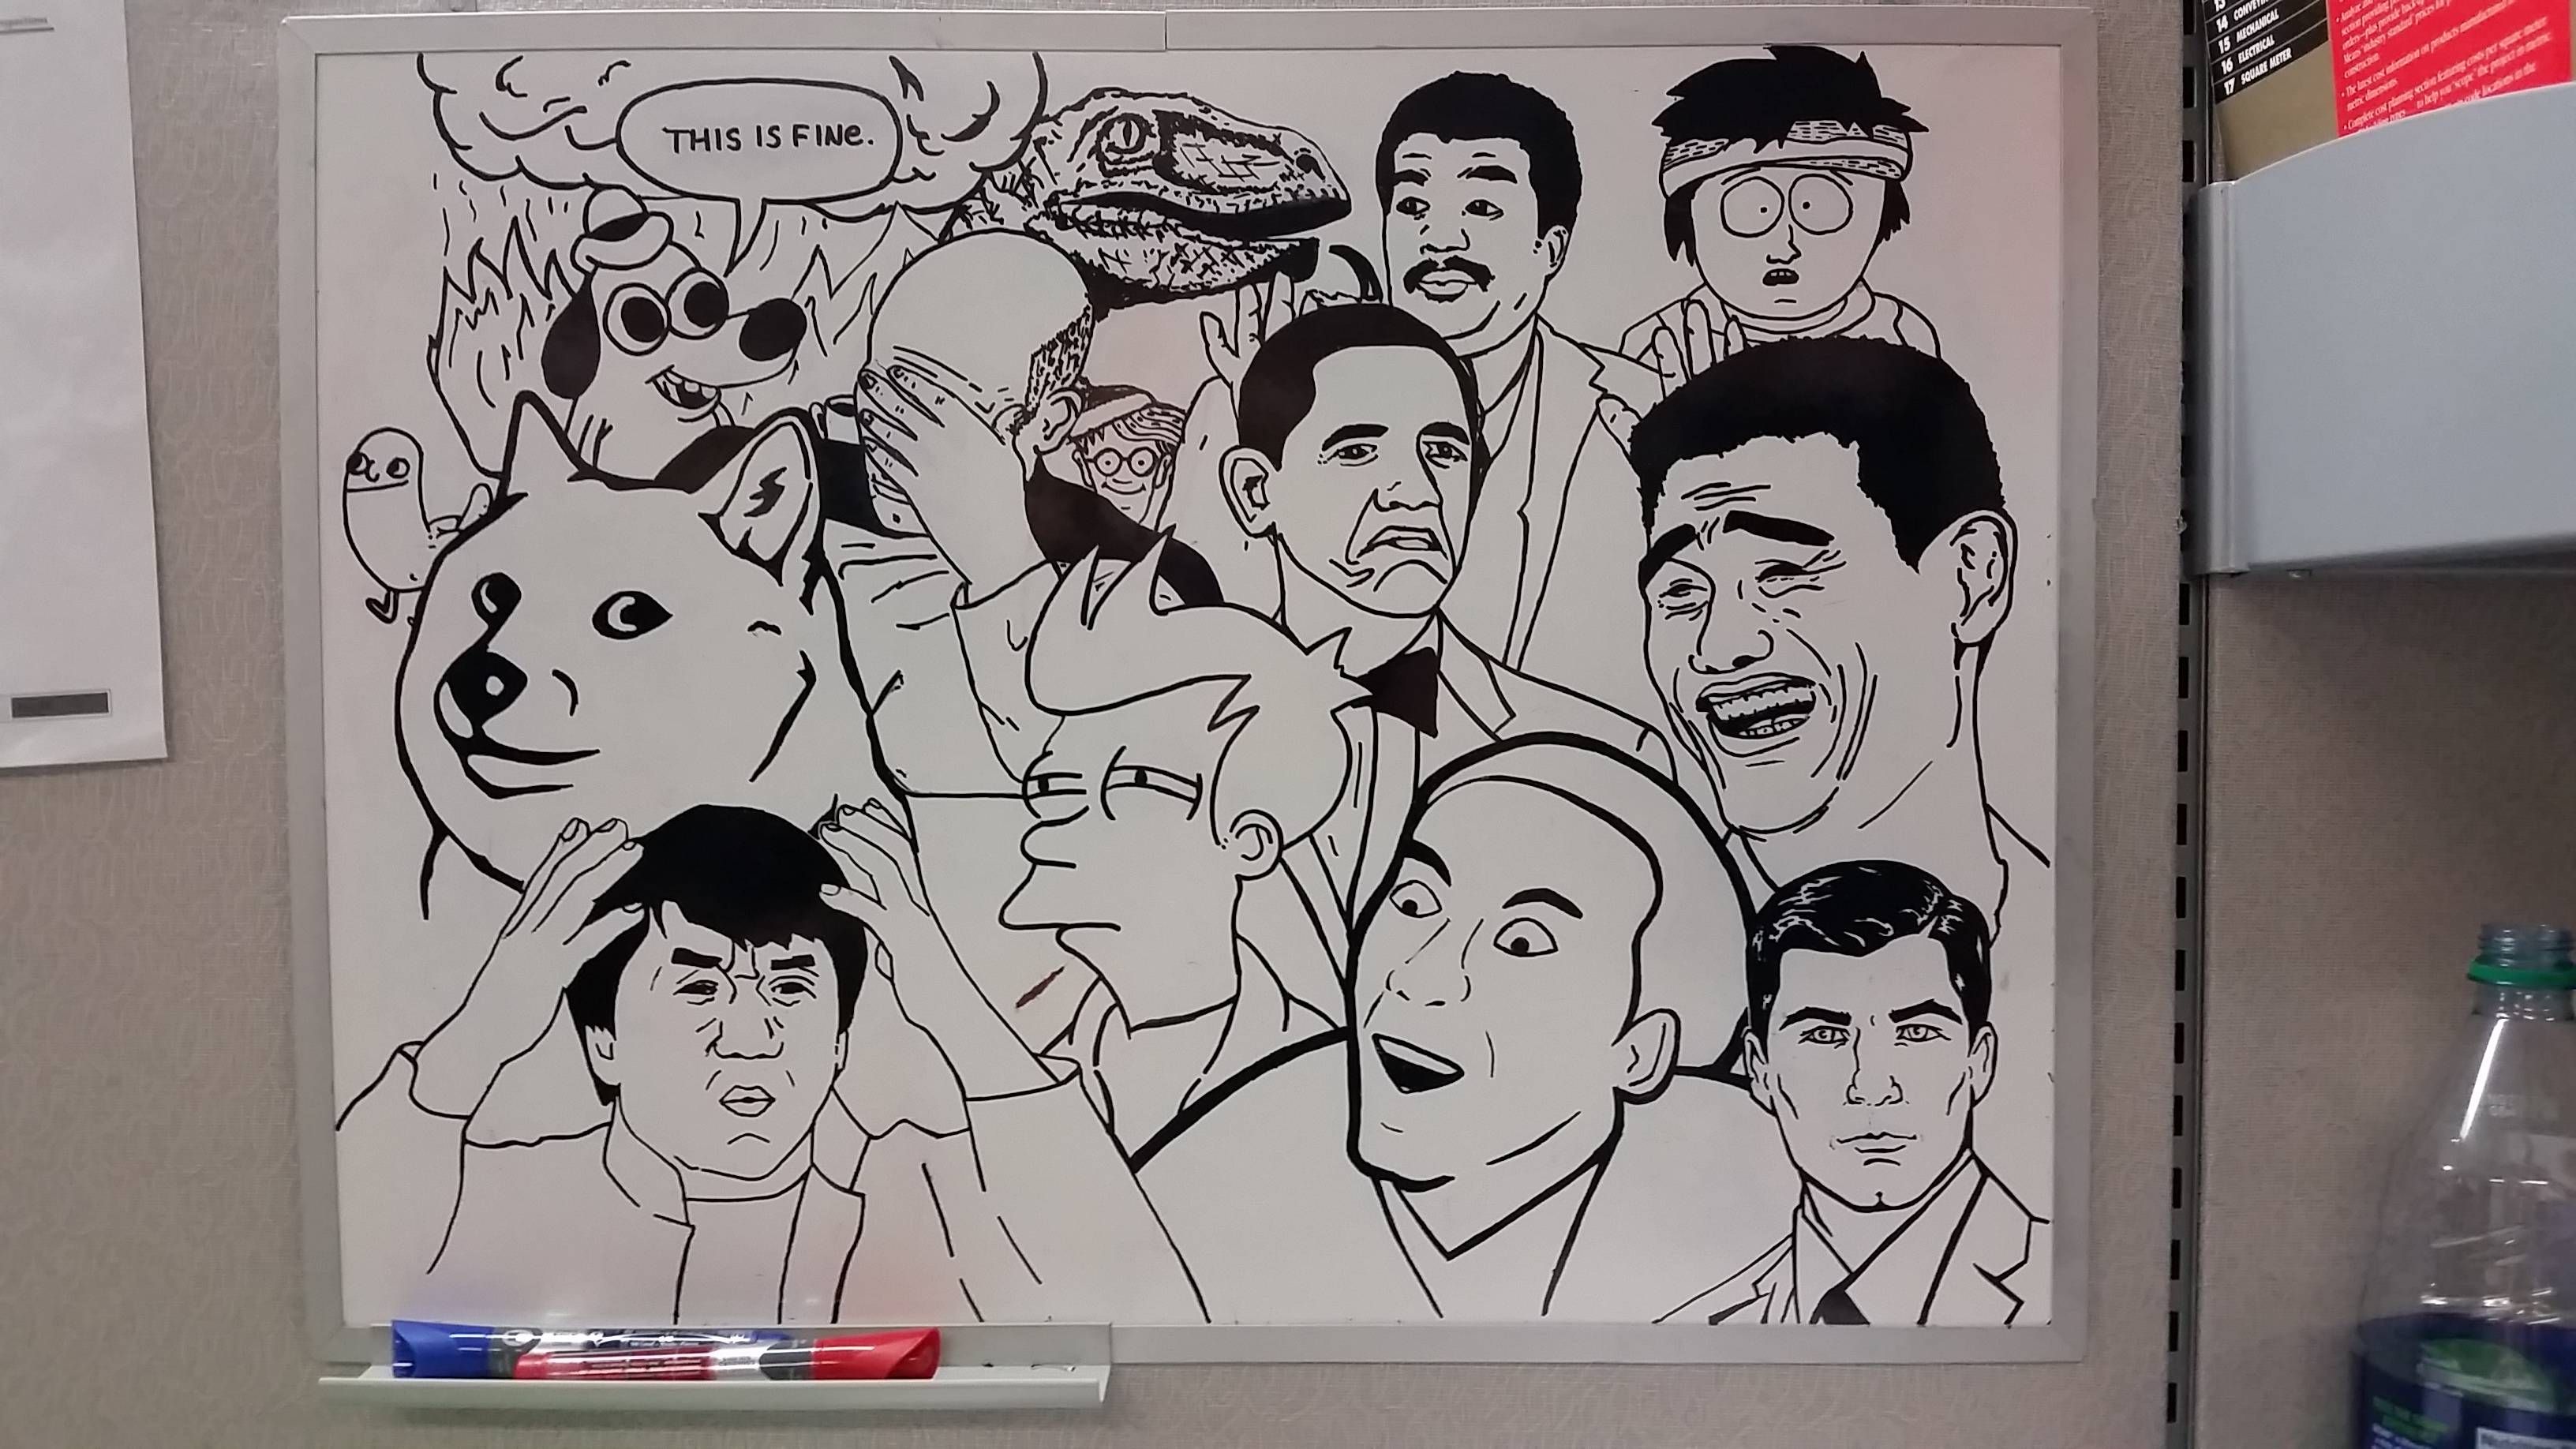 My manager told me "Work like you meme it". This is now my whiteboard at work.